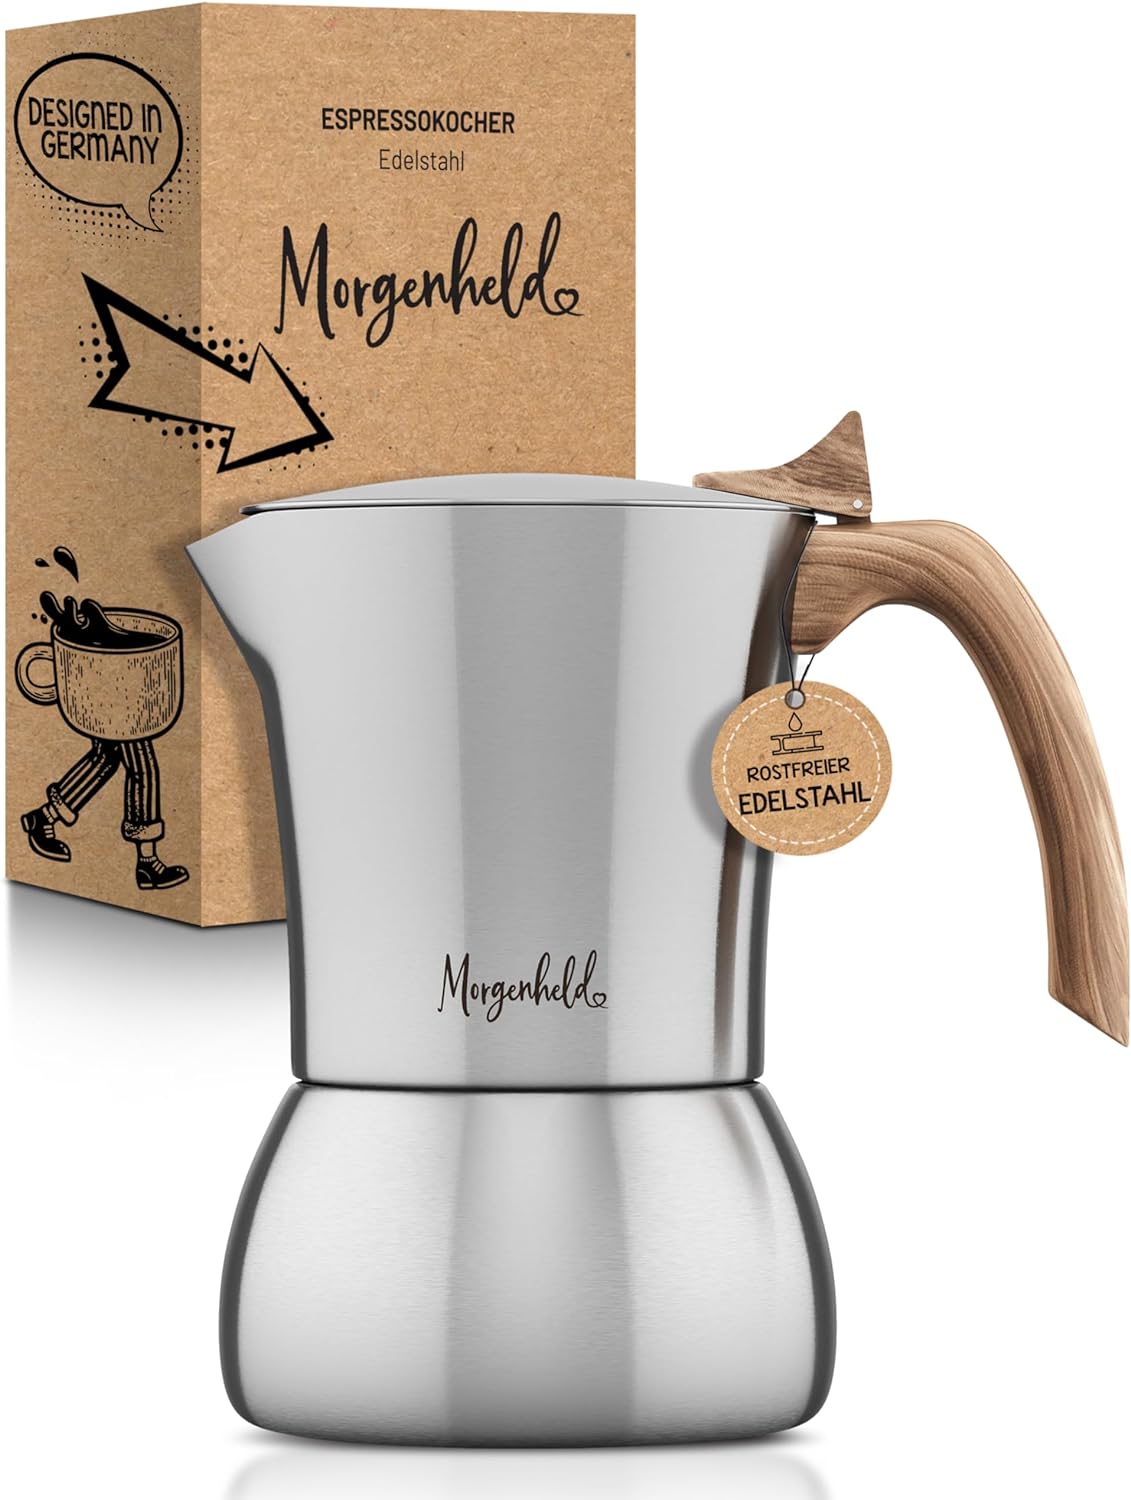 Morgenheld Premium Espresso Maker for 4 Cups [200 ml] Made of Rustproof Stainless Steel - Mocha Pot, Espresso Jug Suitible for All Hob Types - Dishwasher Safe